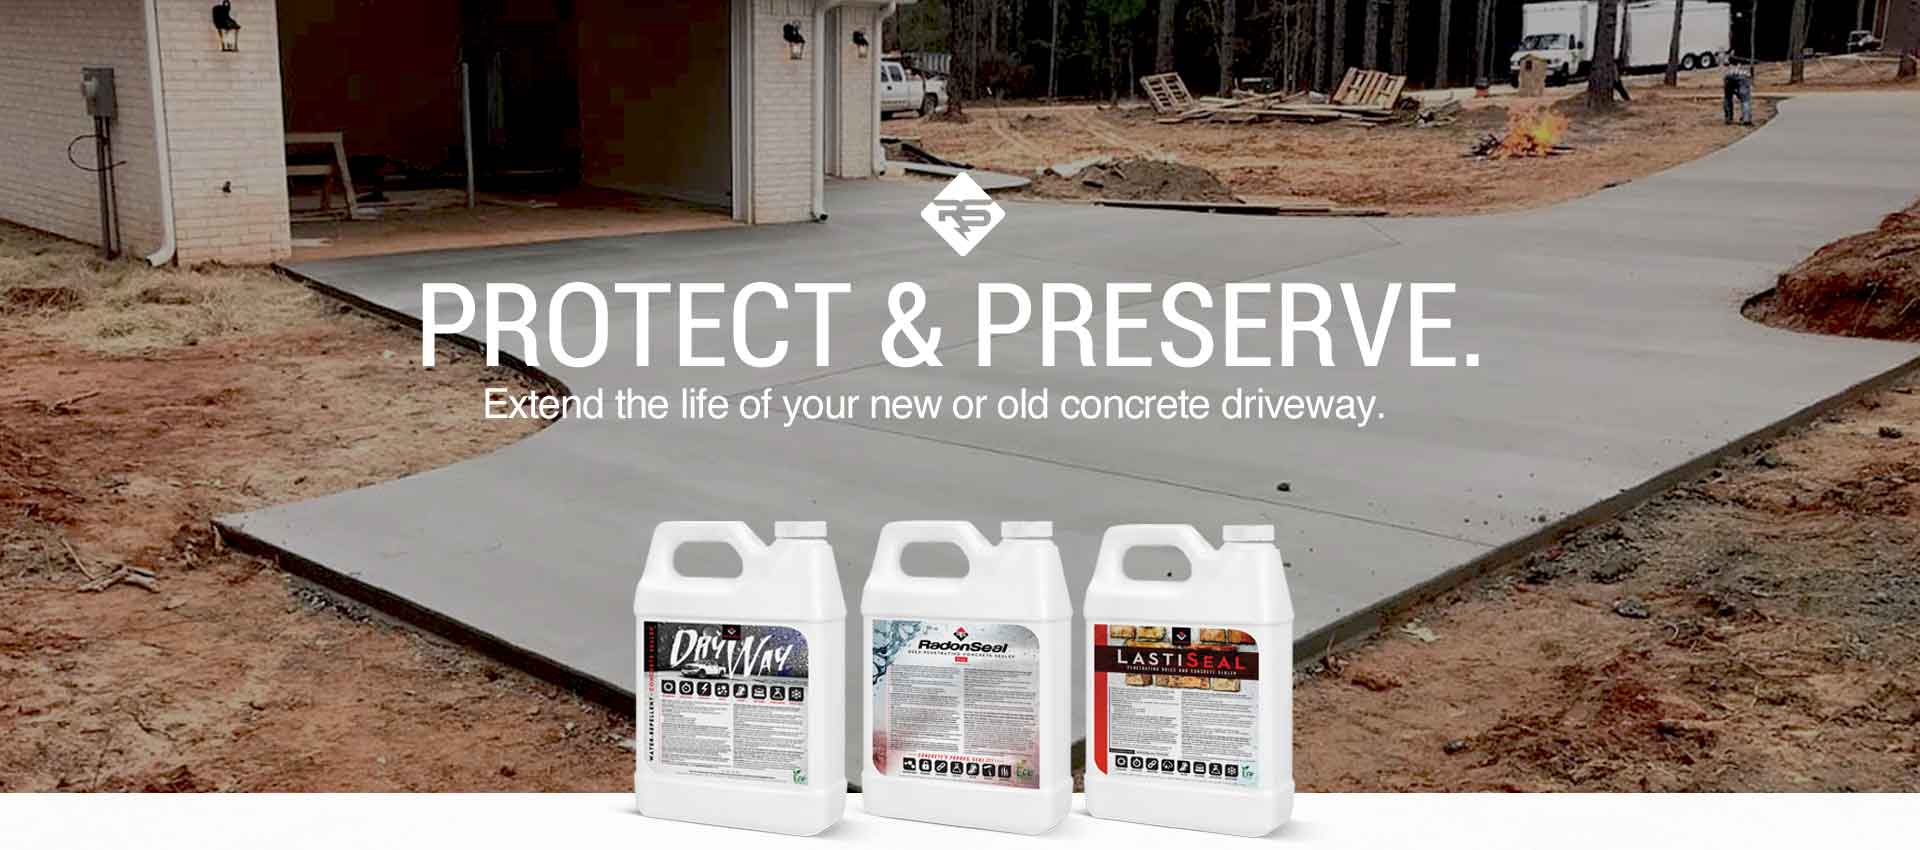 Protect and Preserve Your Concrete Driveway with Penetrating Driveway Sealers